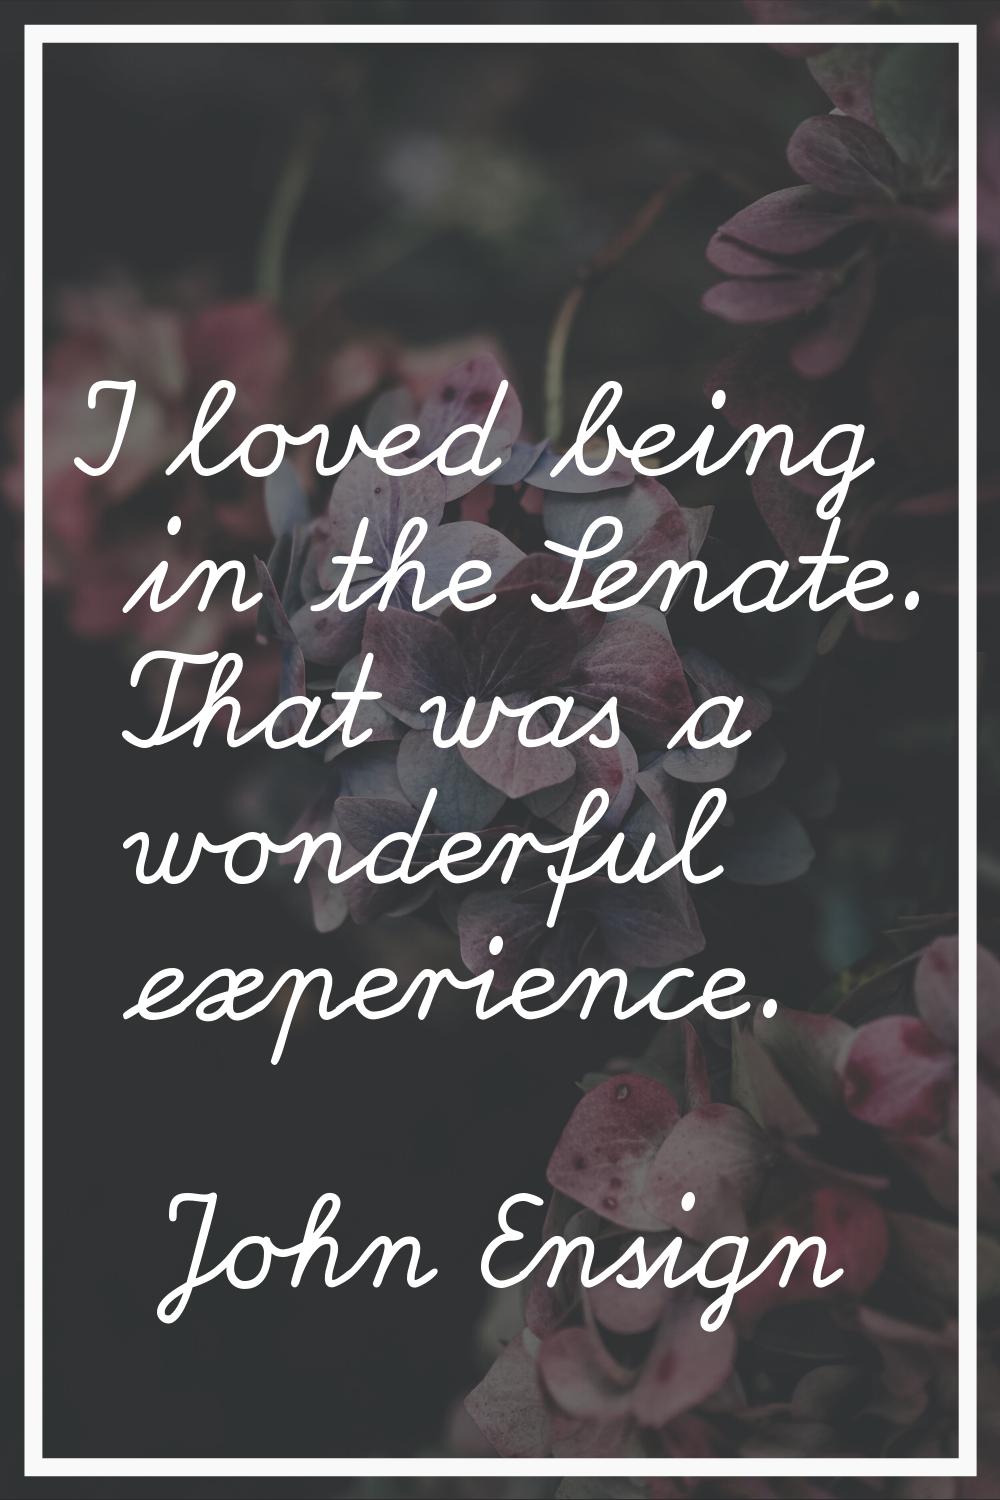 I loved being in the Senate. That was a wonderful experience.